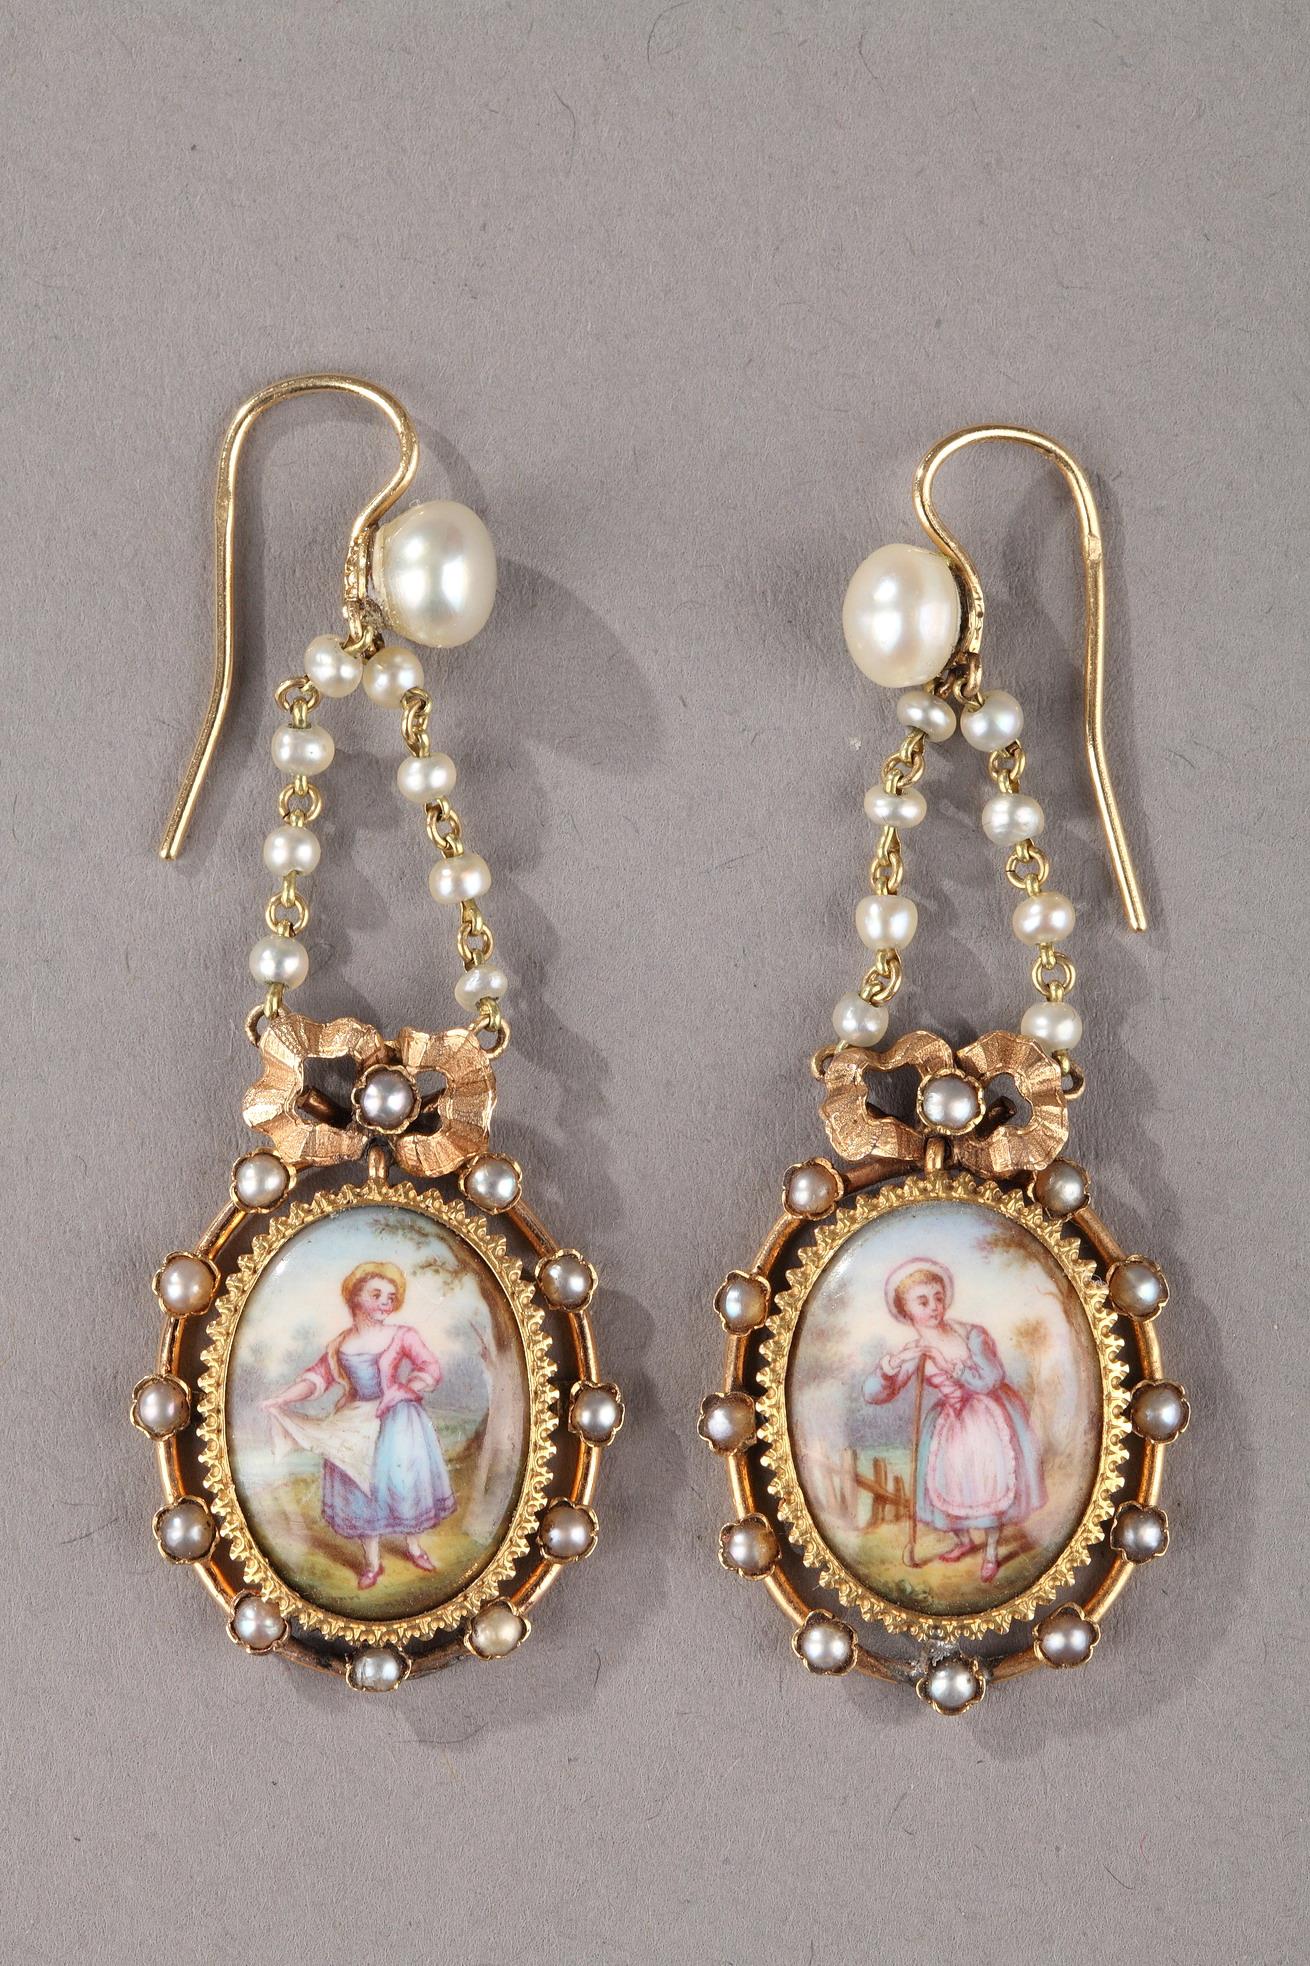 Pair of Gold, Enamel, Pearl, and Mother-of-Pearl Earrings – Napoleon III